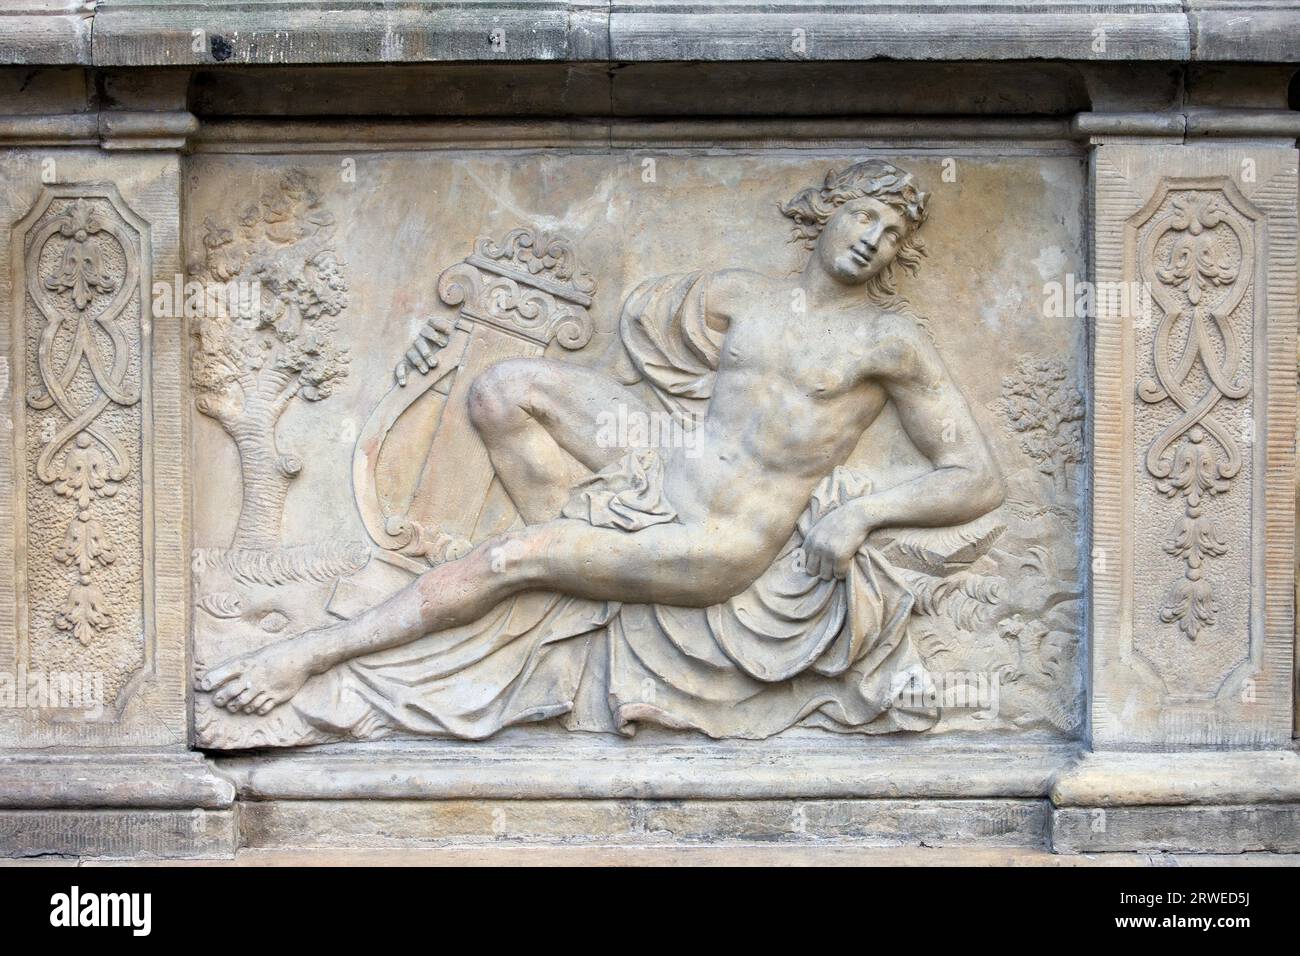 18th century bas-relief of the Apollo (God in Greek mythology) by Johann Heinrich Meissner on the historic tenement house terrace in the Old Town of Stock Photo